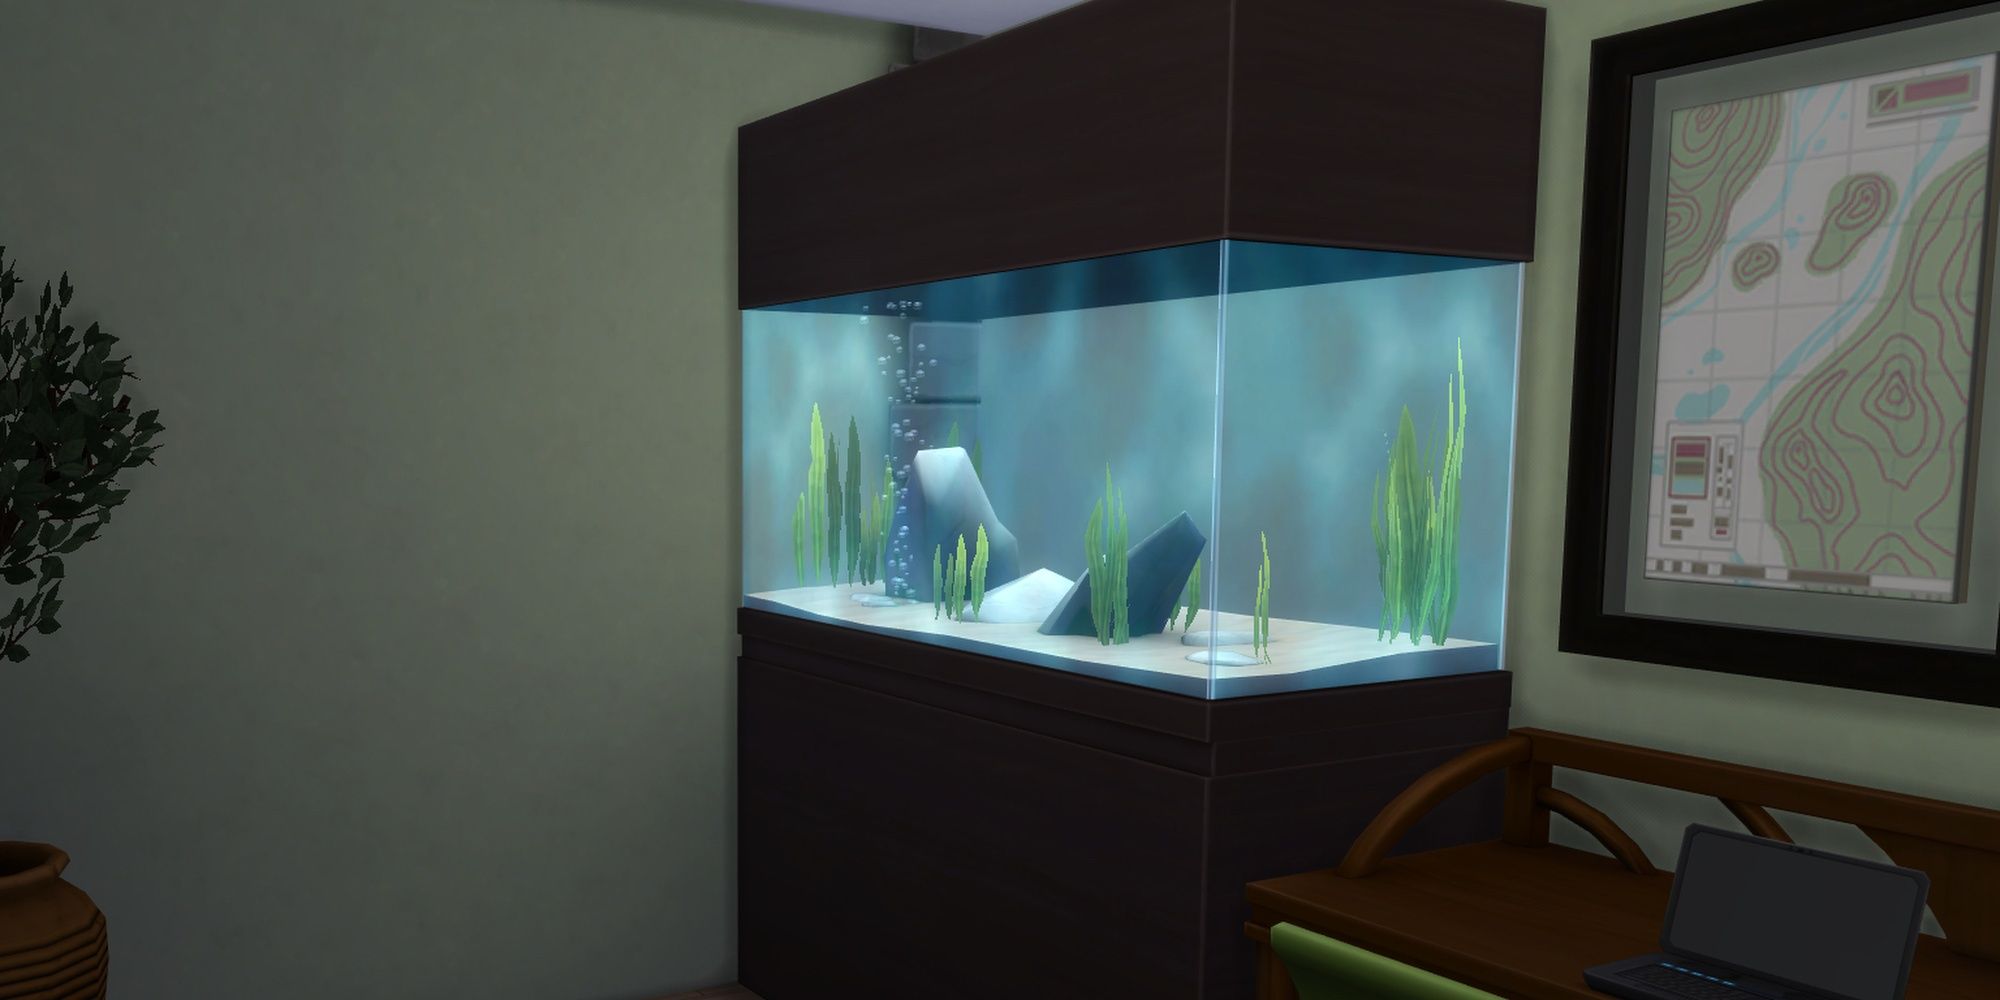 A large fish tank with a wooden base in a study from The Sims 4.